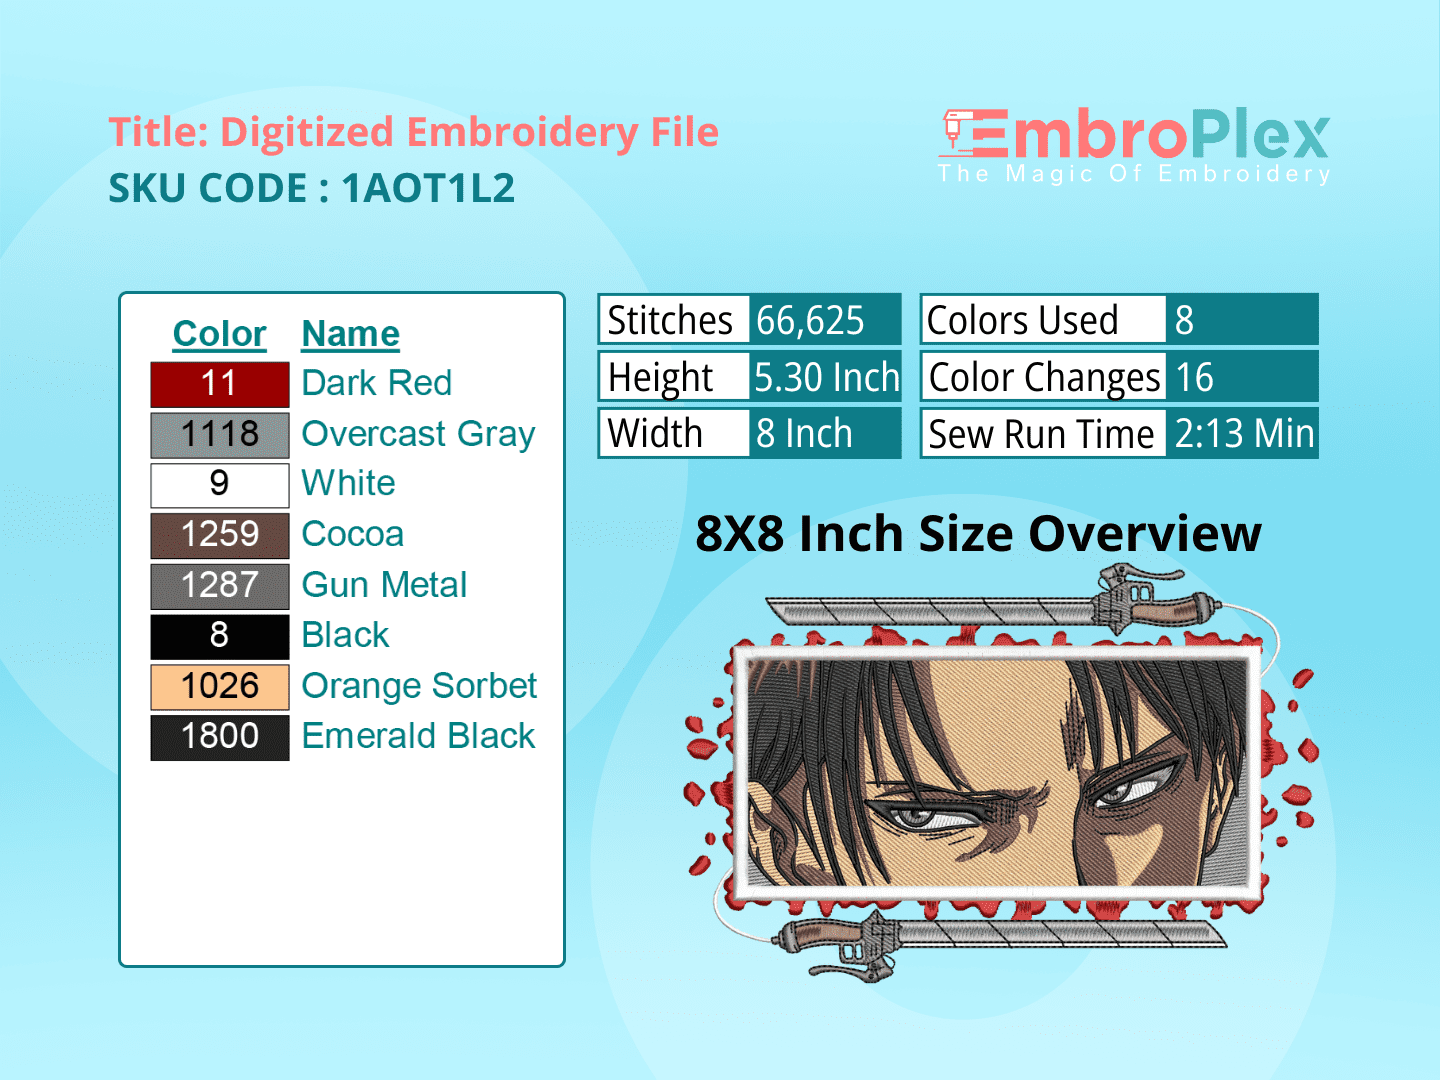 Anime-Inspired Eren Embroidery Design File - 8x8 Inch hoop Size Variation overview image